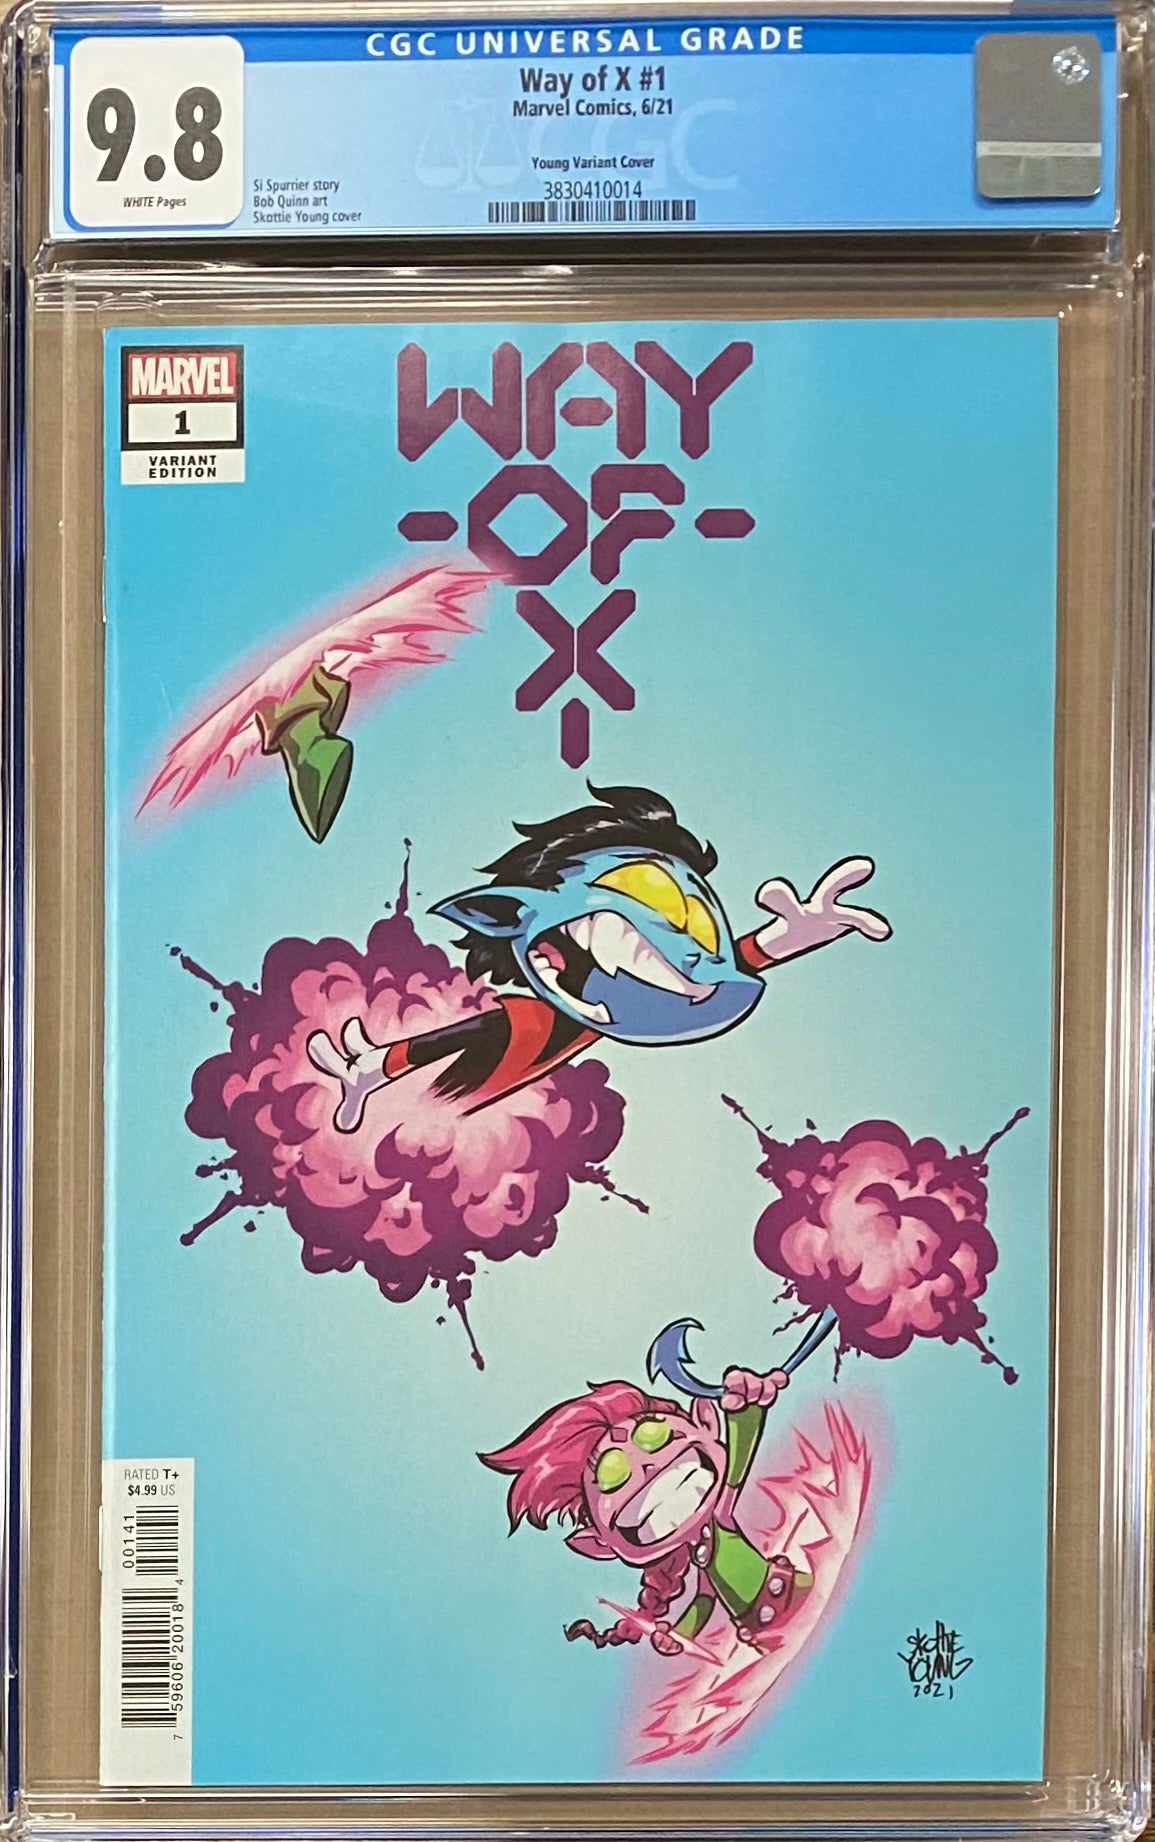 Way of X #1 Young Variant CGC 9.8